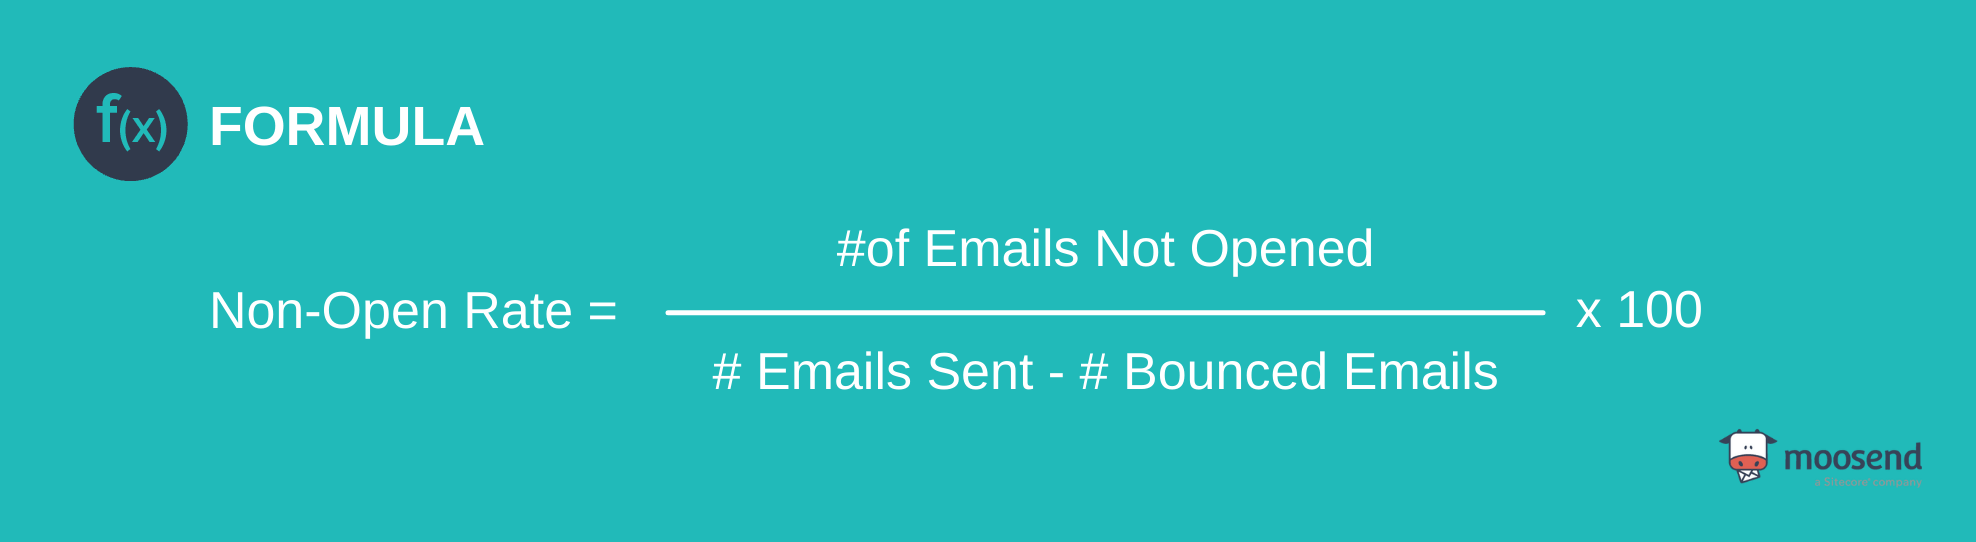 non open rate for email